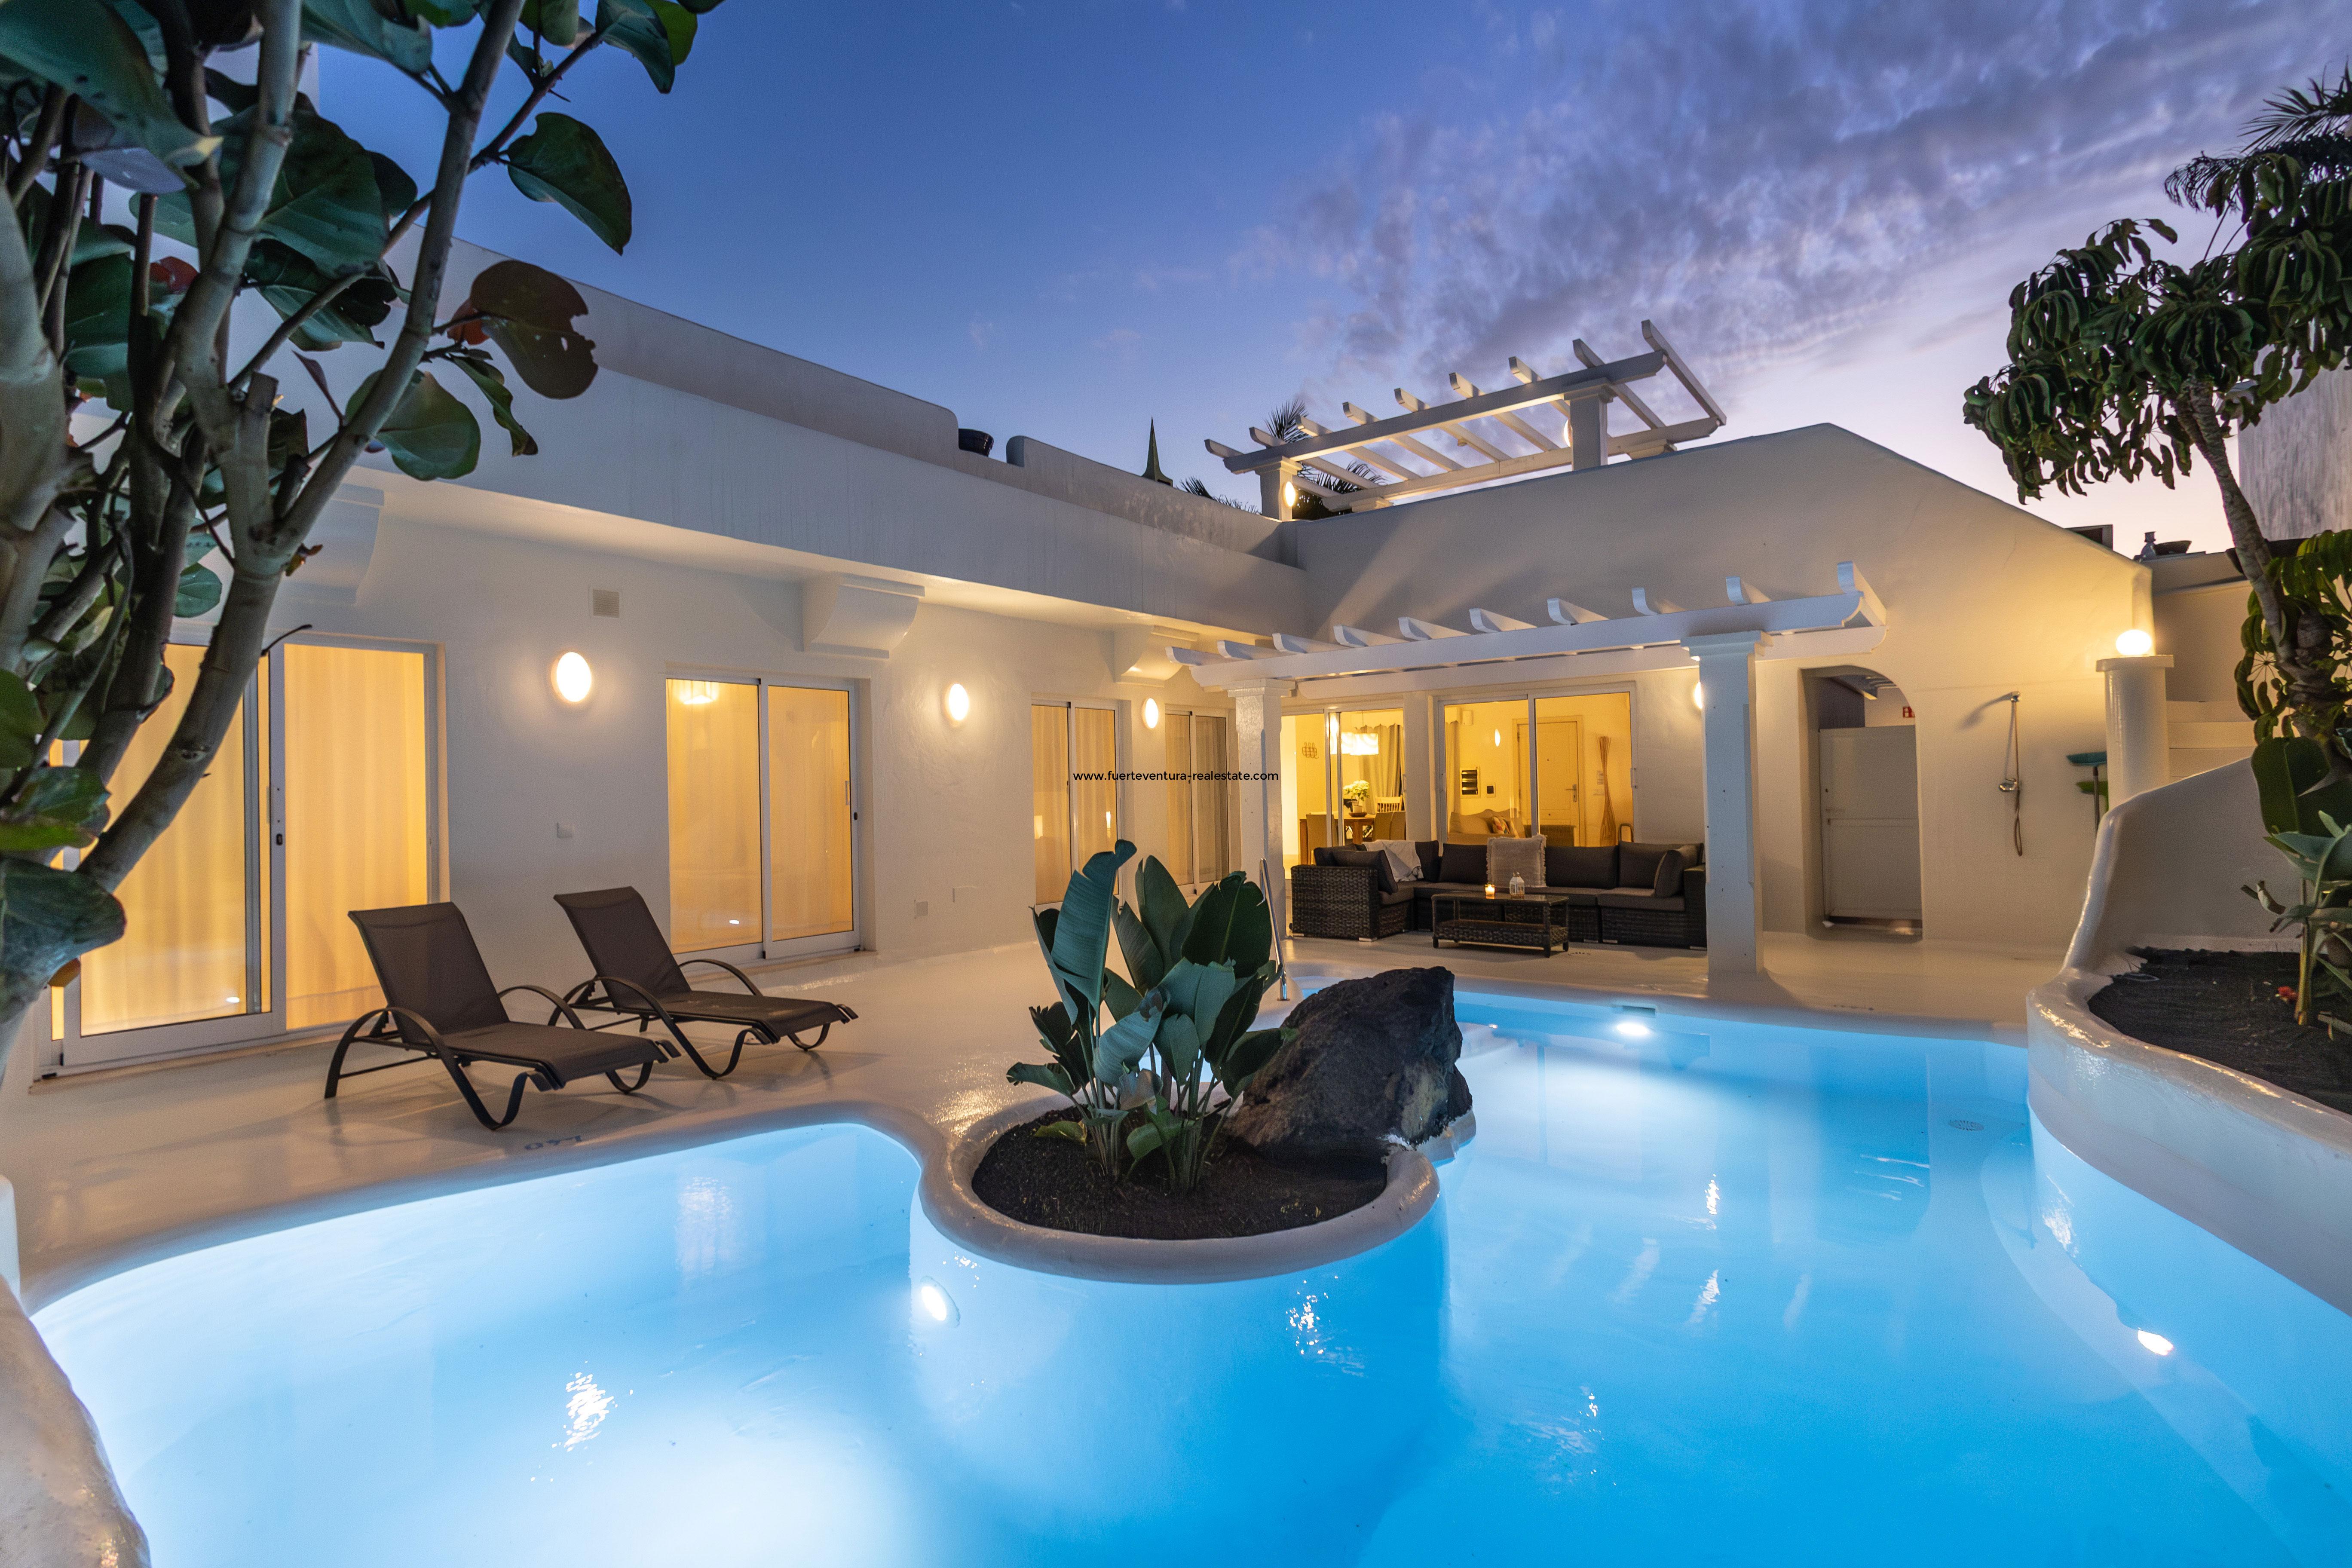 Selling a very nice villa with pool and whirlpool in the Bahia Azul complex in Corralejo